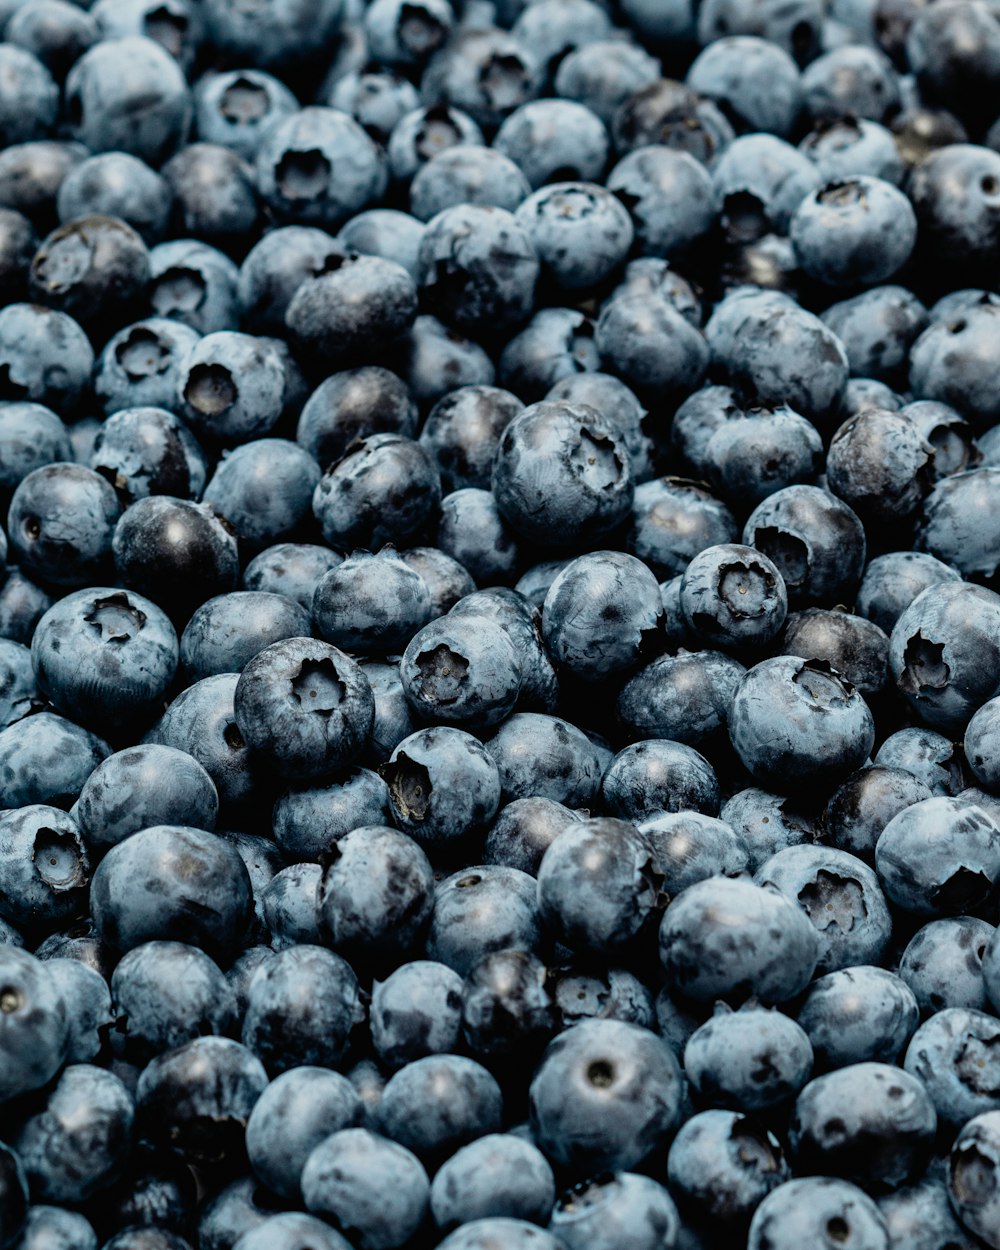 a pile of blueberries is shown close up